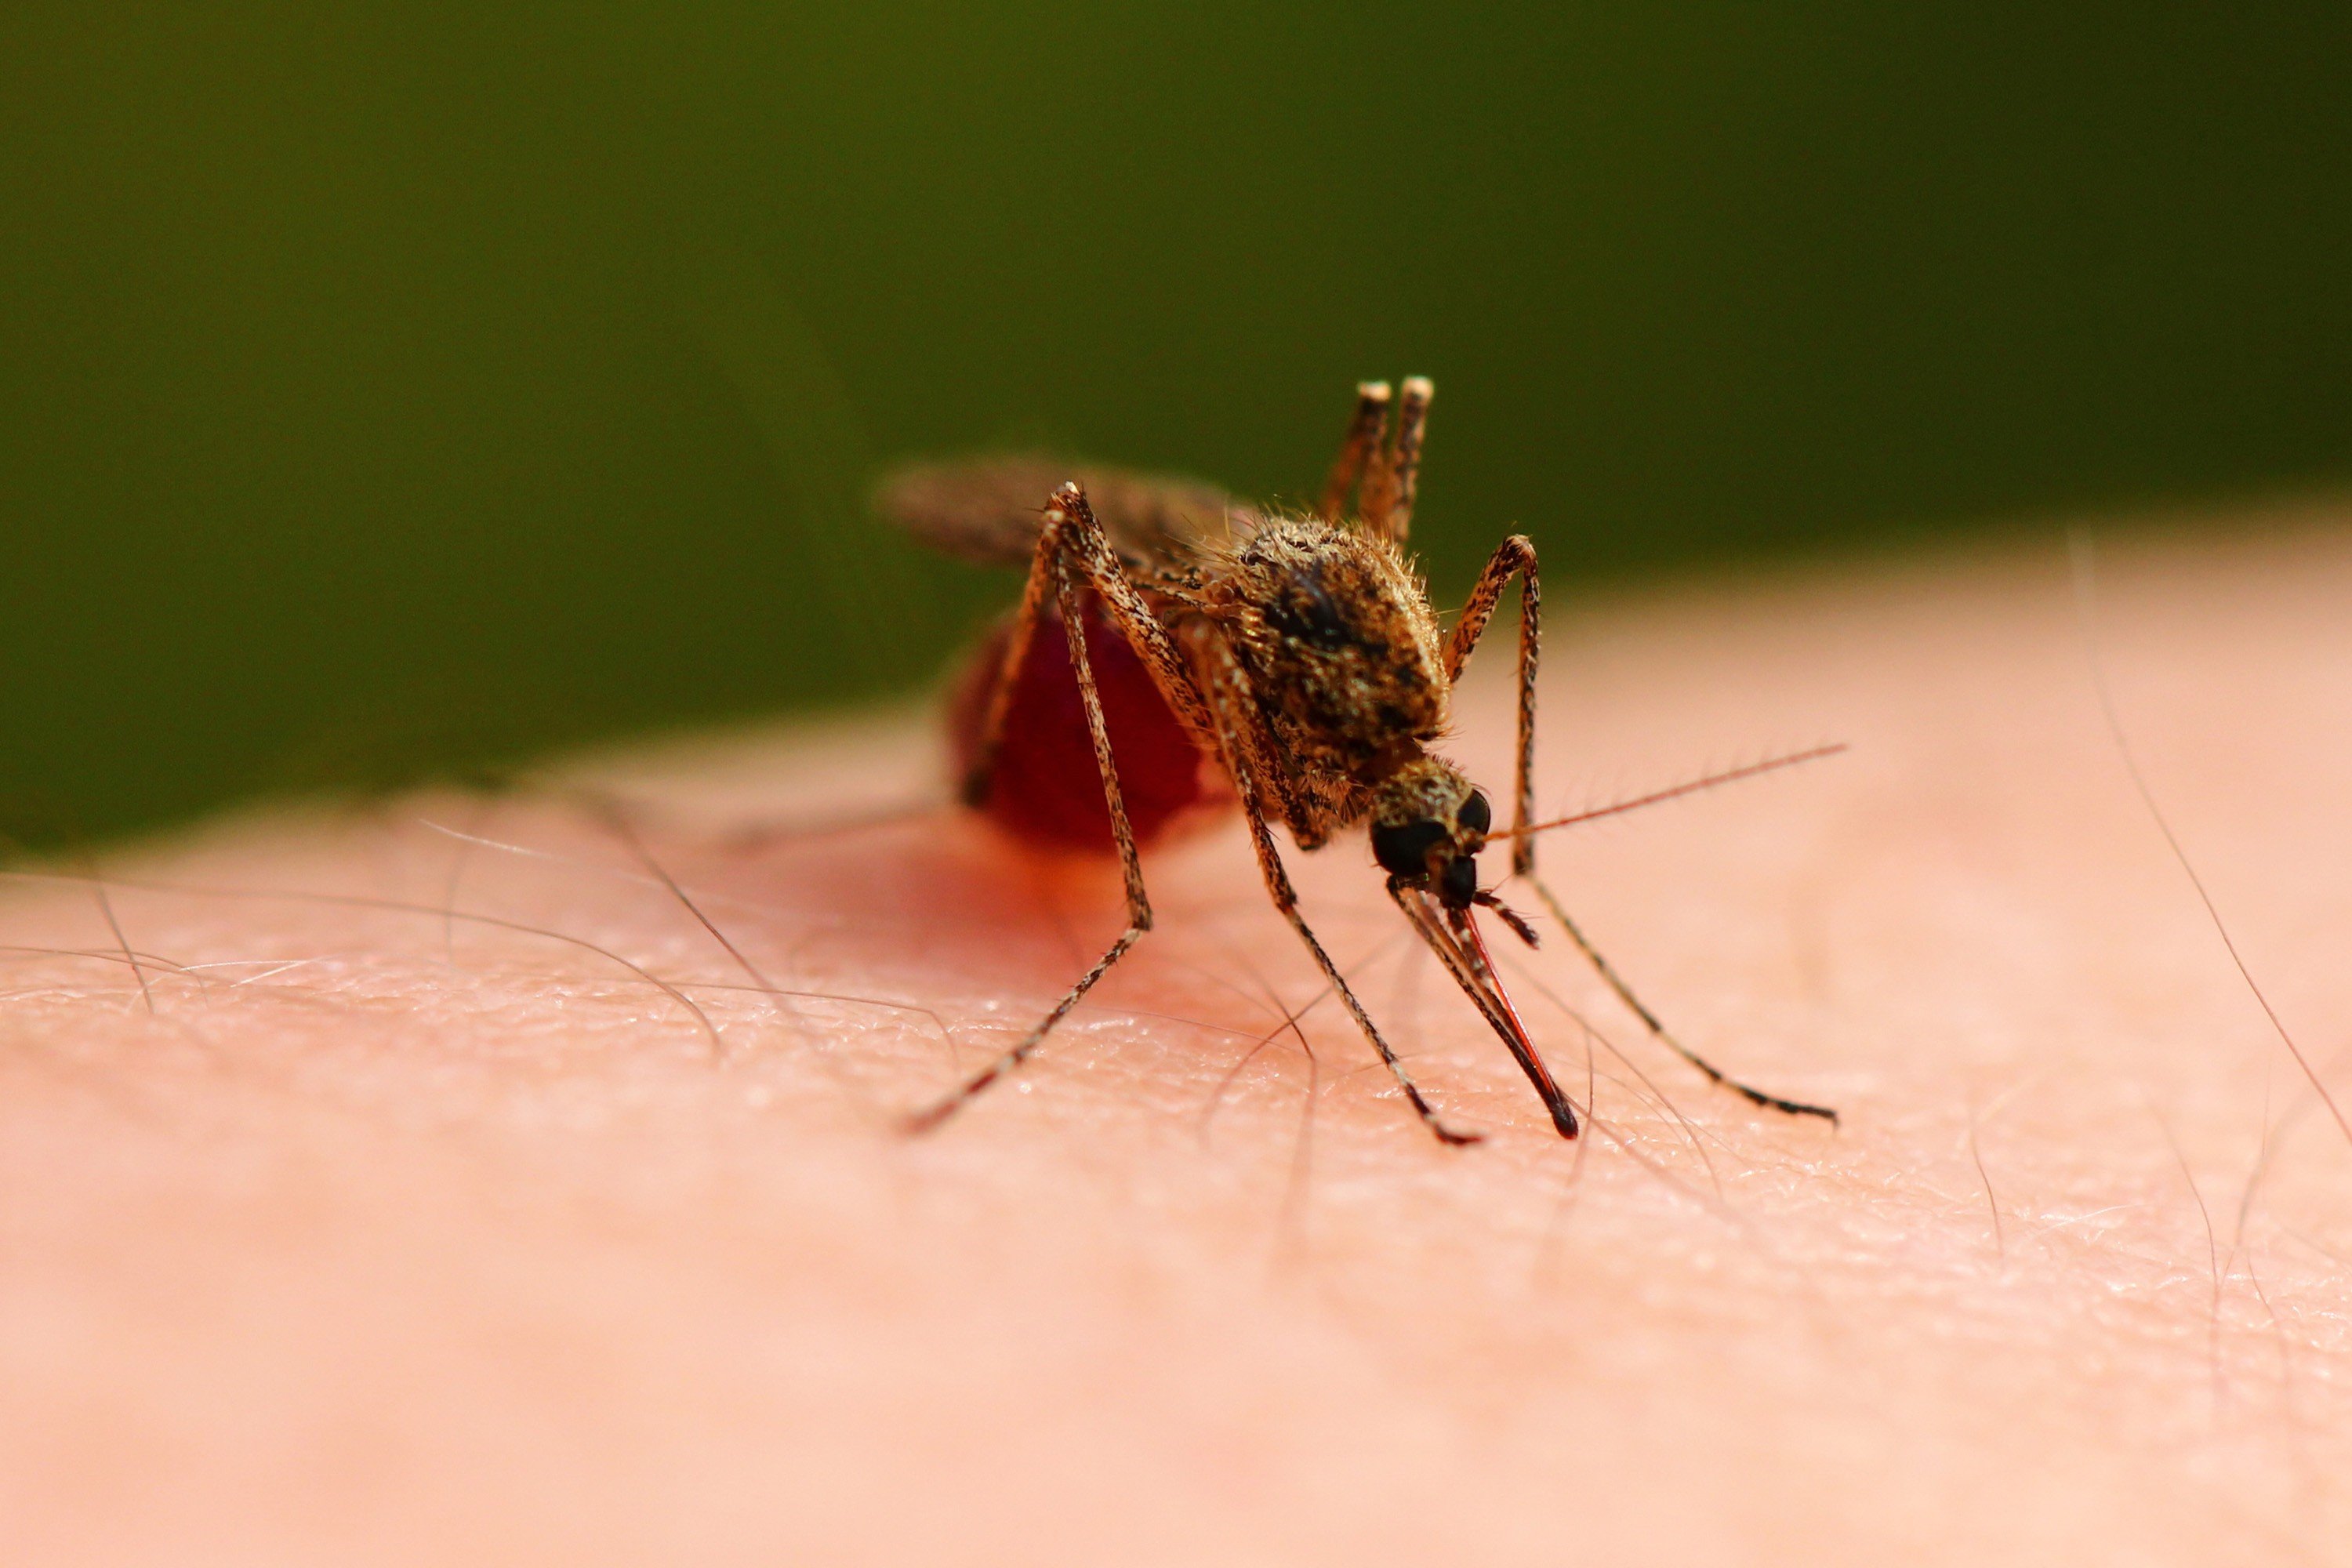 As public health agencies gear up for mosquito season, uncertainty remains around what resources states may need with regards to Zika and whether they will receive adequate federal support from Washington. Photo: TNS